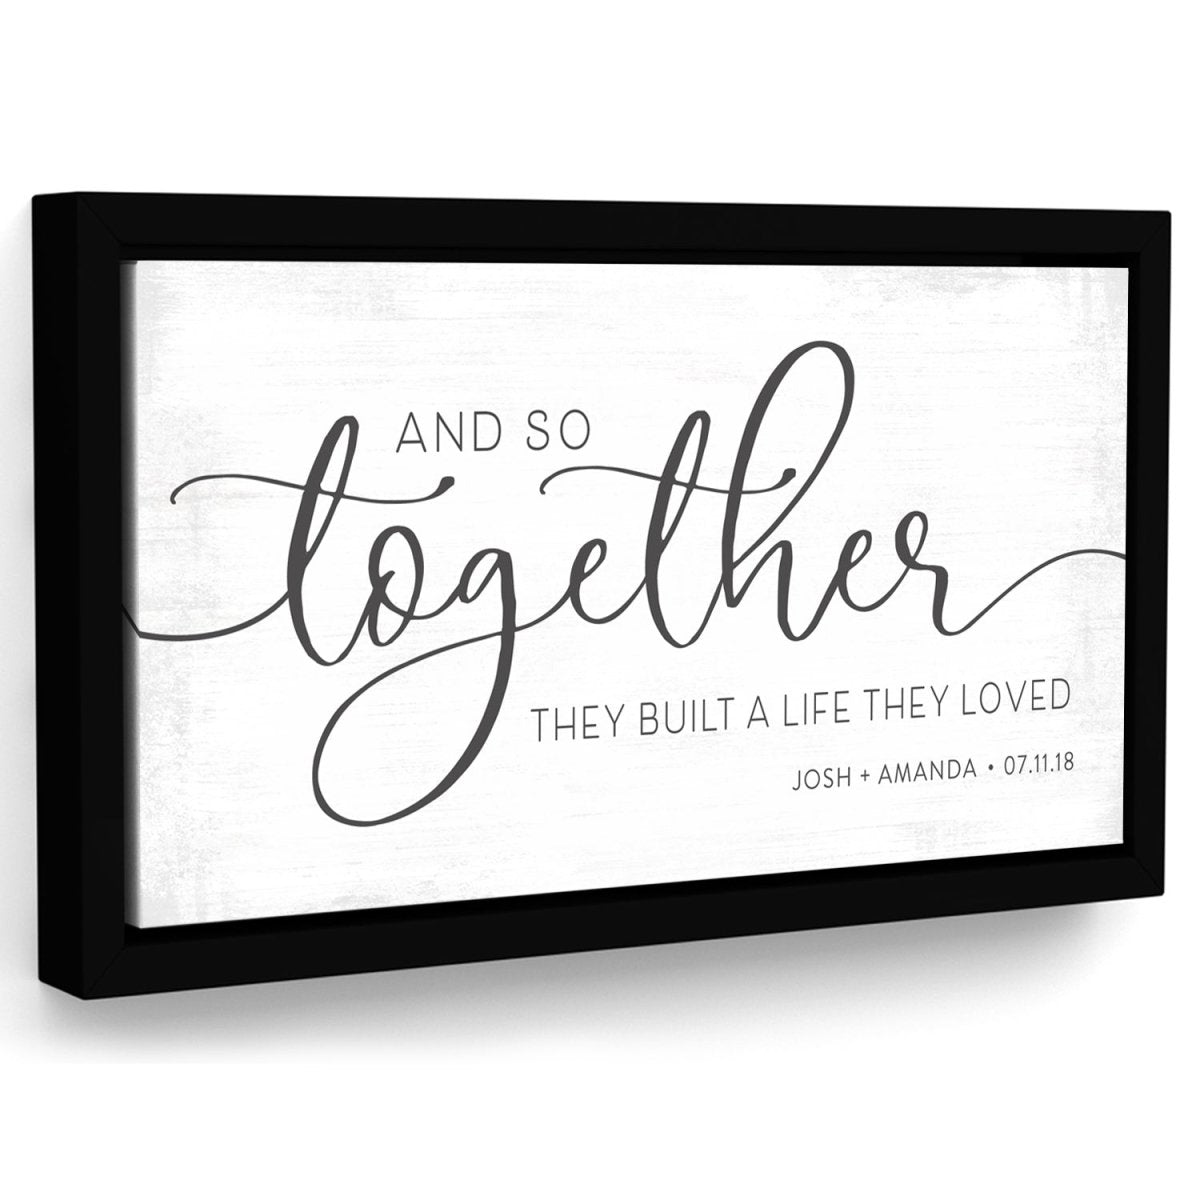 And So Together They Built A Life They Loved Canvas Wall Art - Pretty Perfect Studio